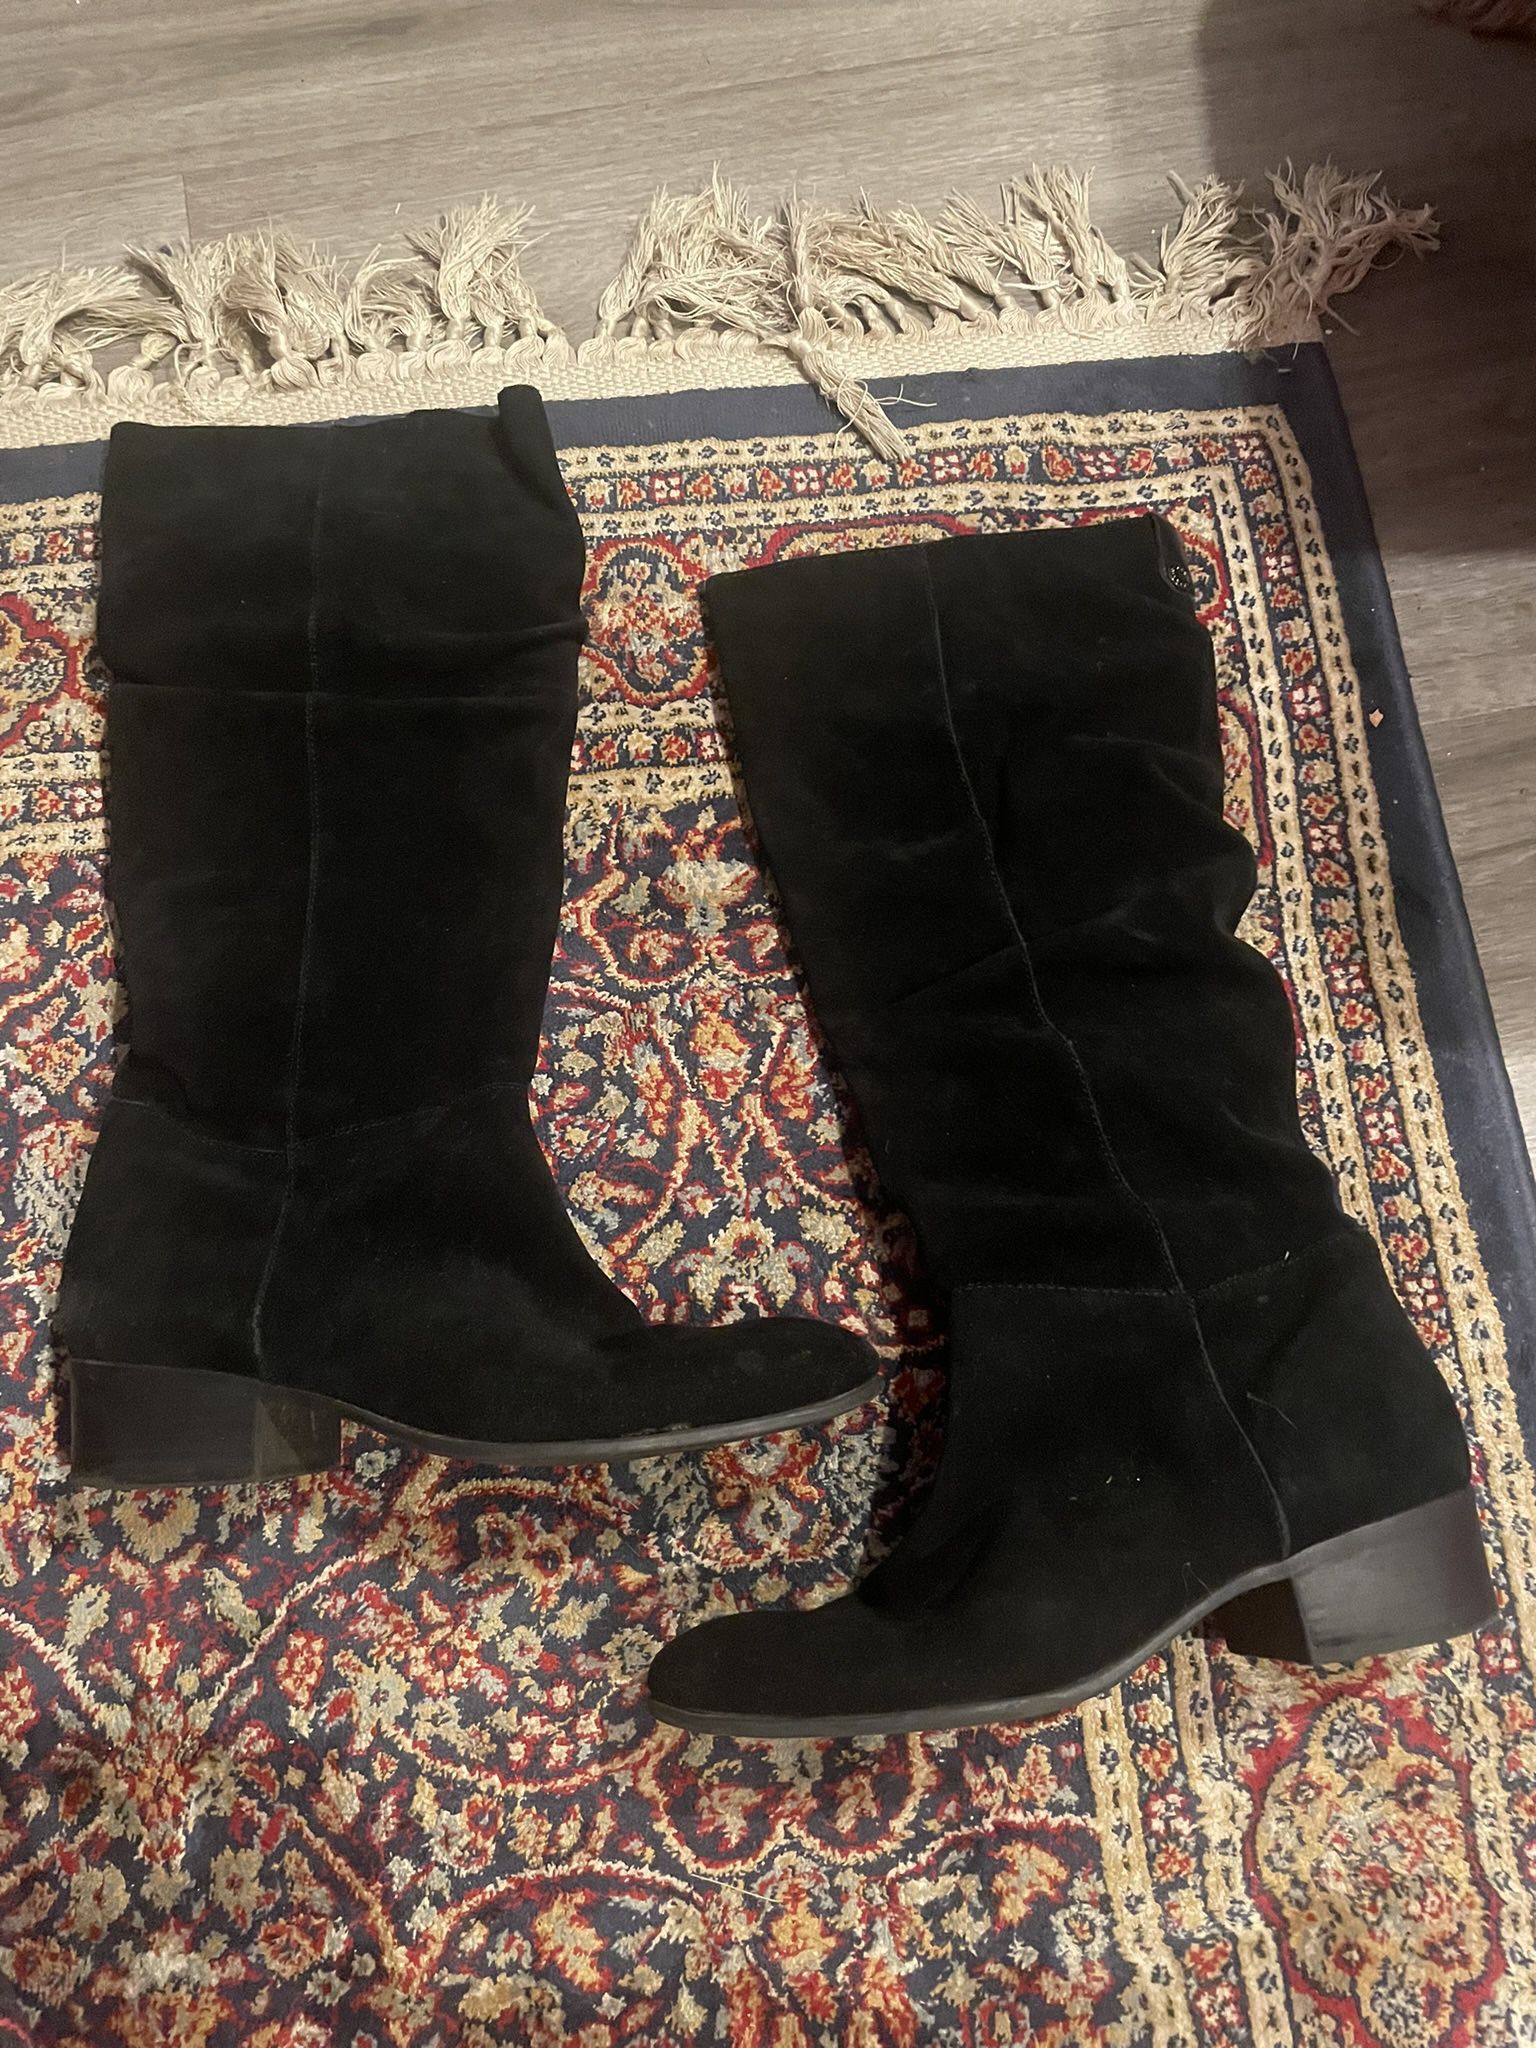 Women’s Knee High Leather Boots Size 9